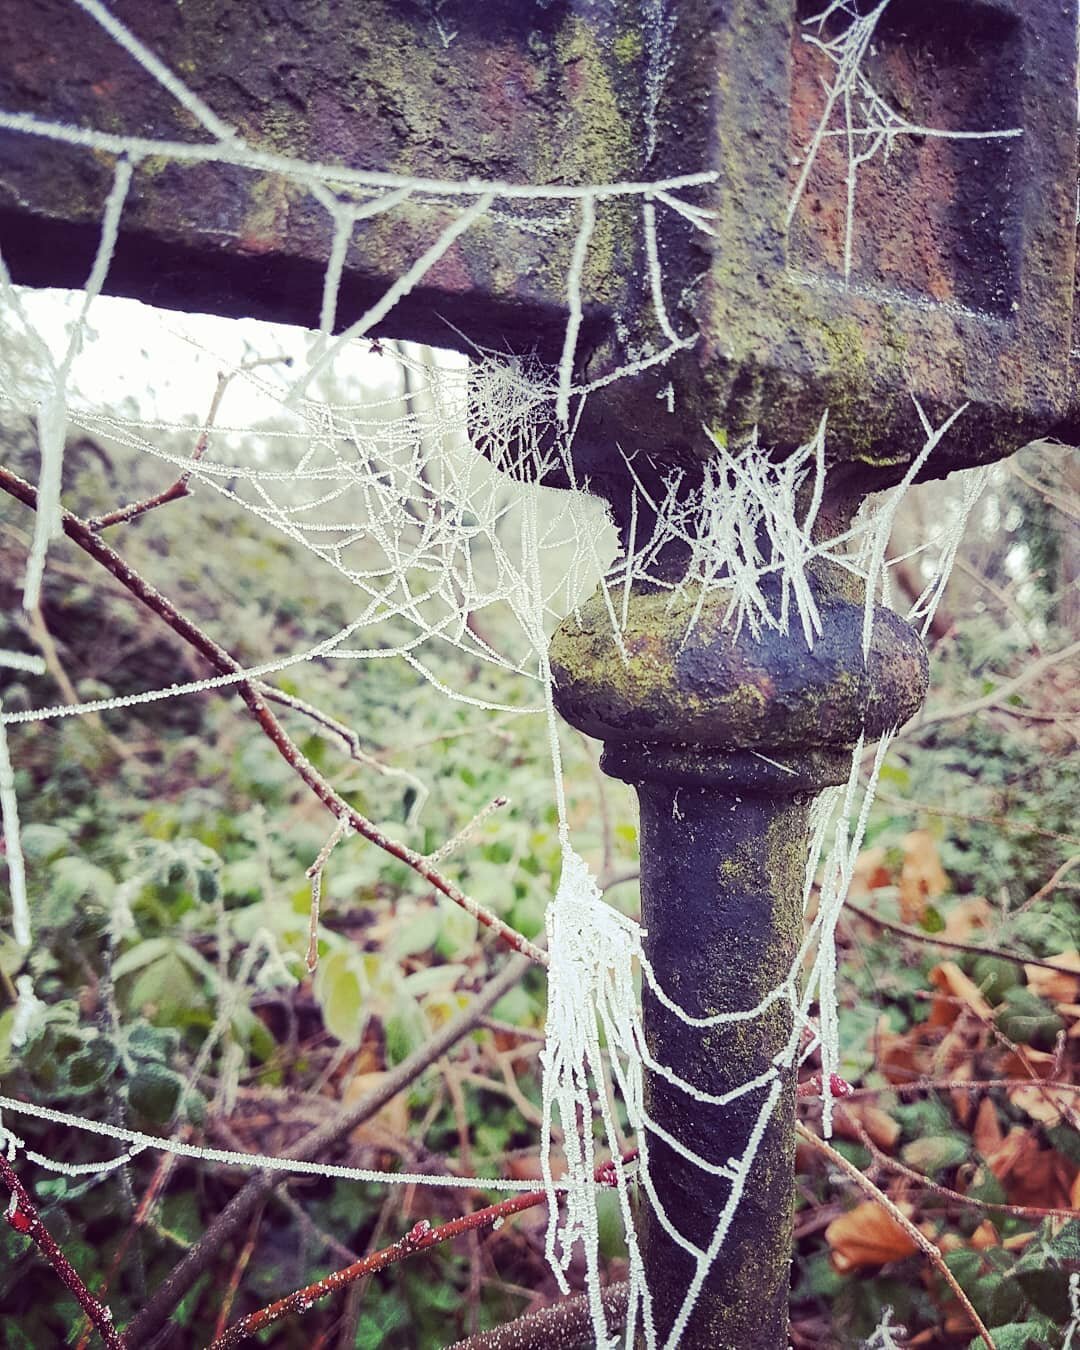 Frost: railings wearing necklaces, a spider flying a kite...
.
.
.
.
#frost #january #winter #london #SE19